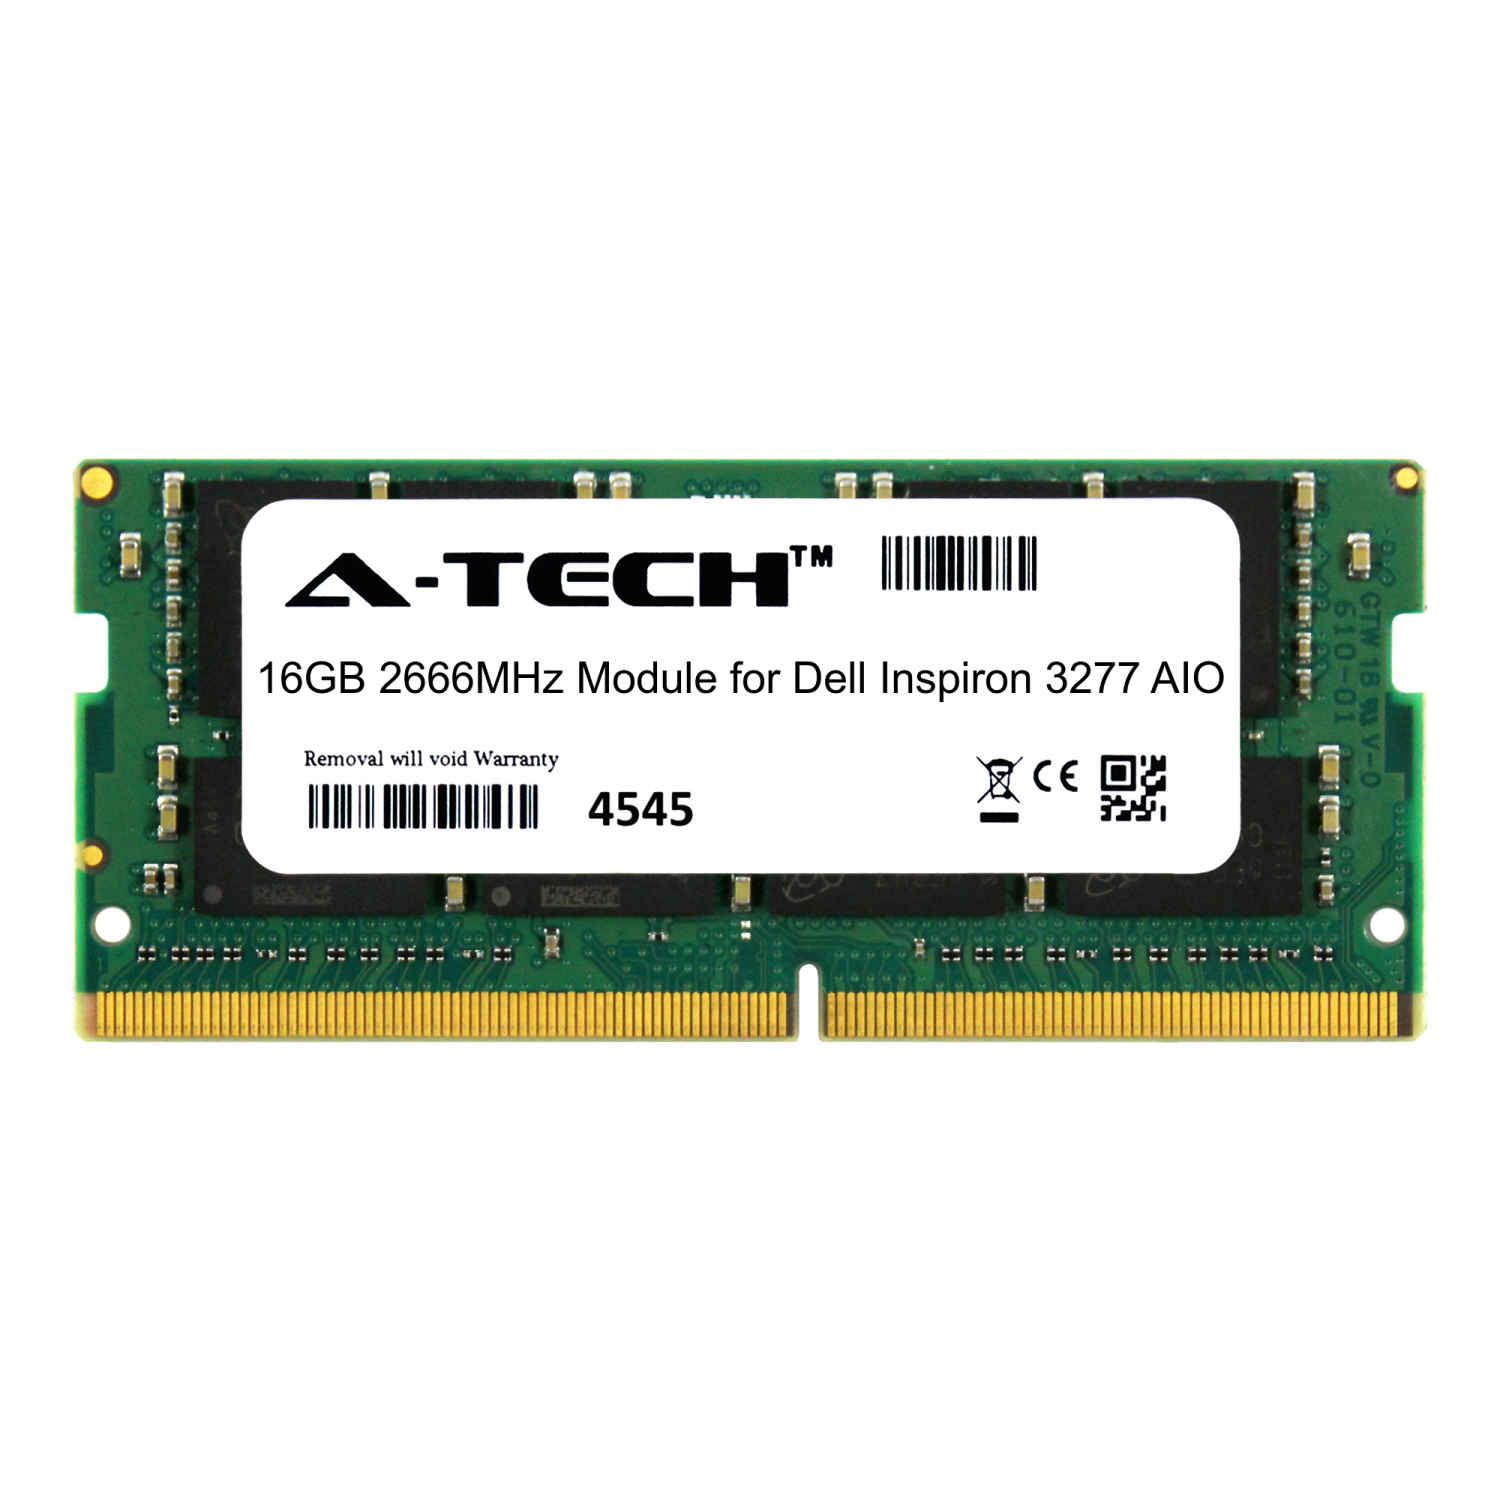 A-Tech 16GB 2666MHz DDR4 RAM for Dell Inspiron 3277 AIO All-in-One